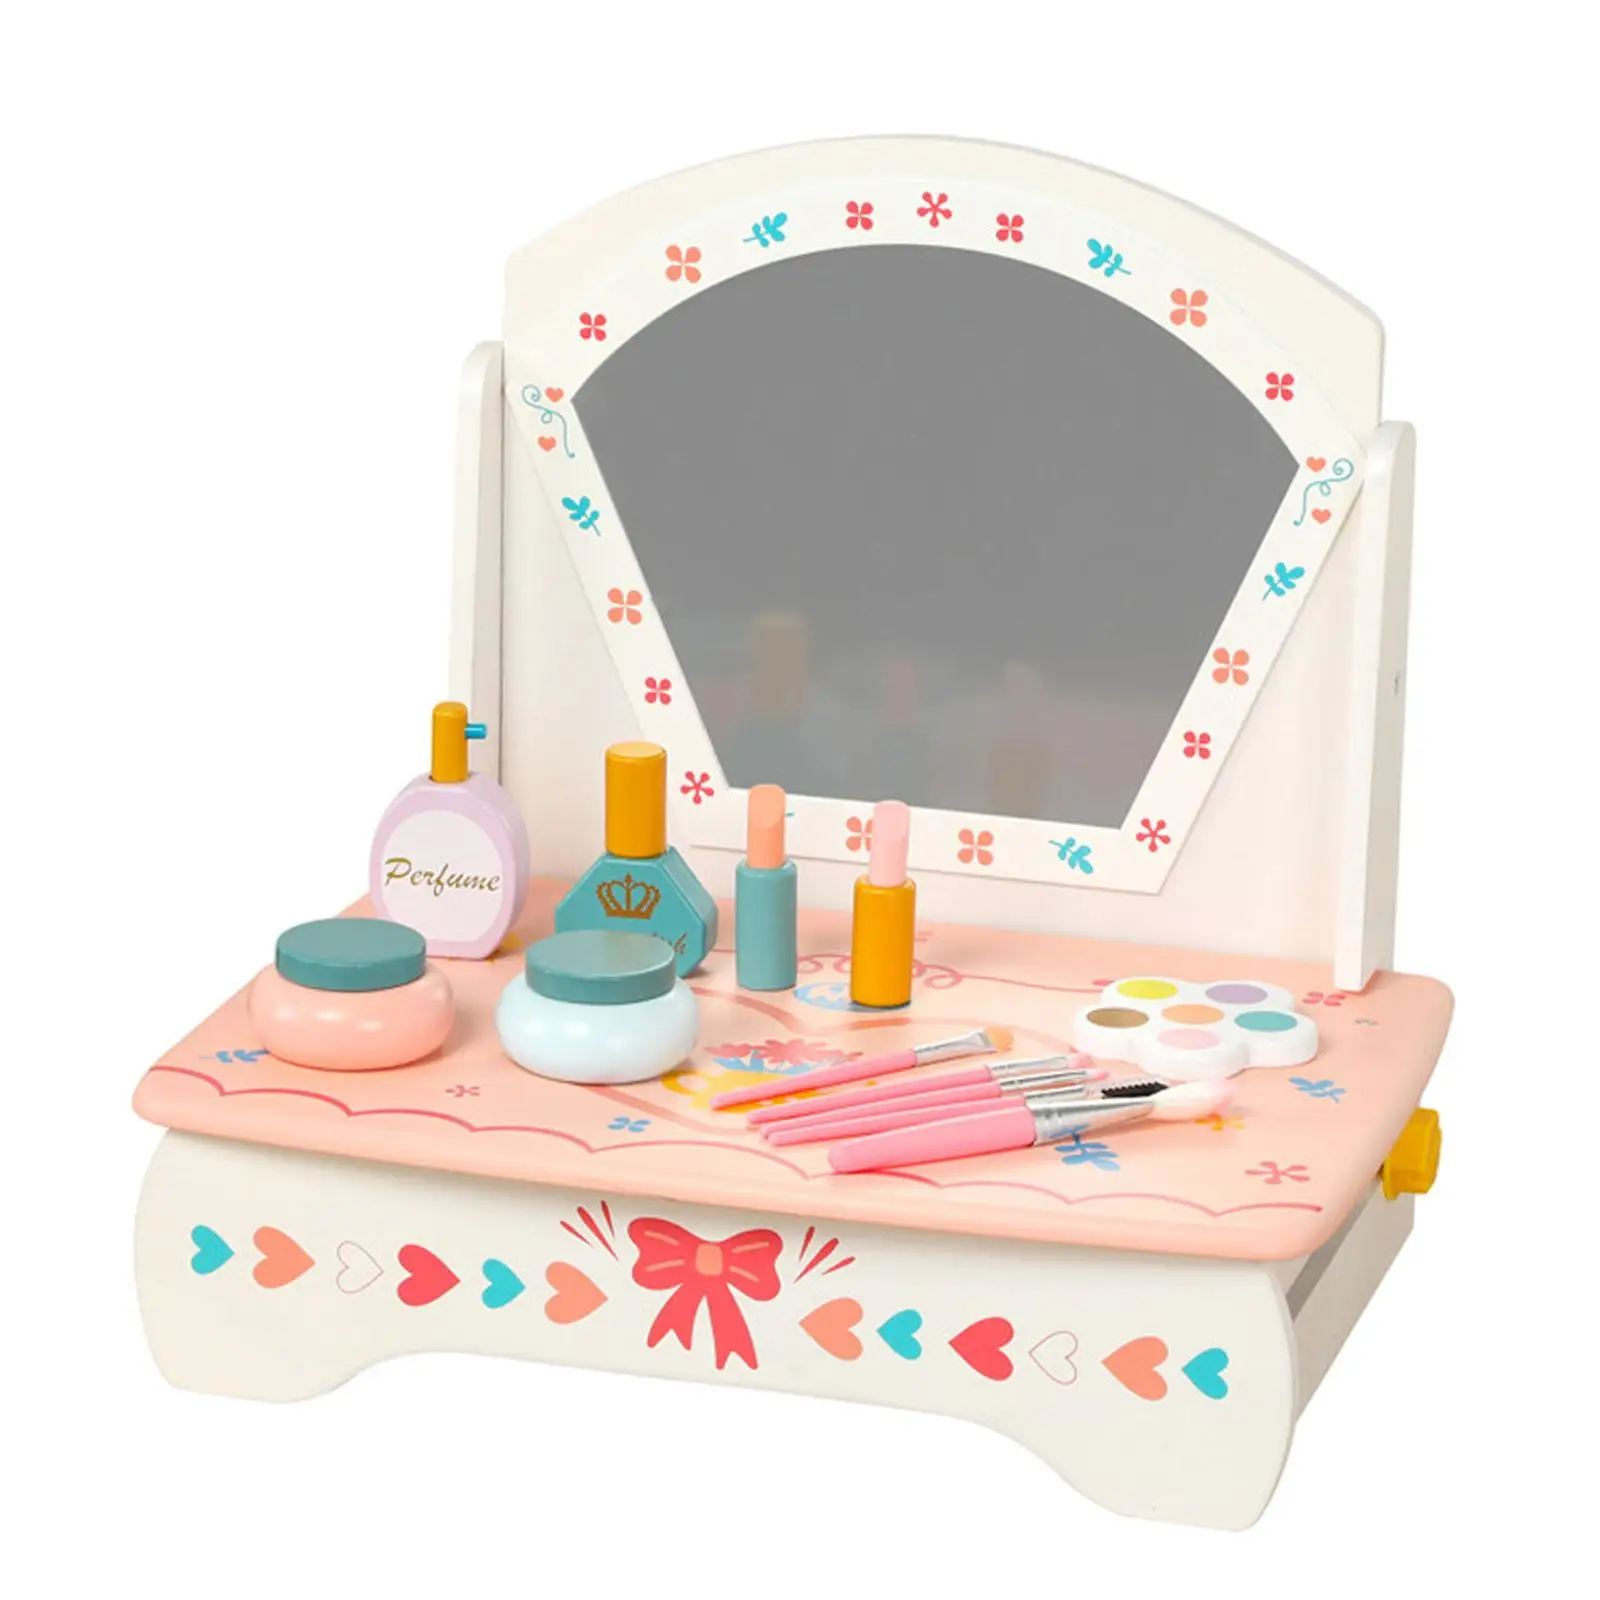 Wooden Vanity Table Toy with Accessories Wooden Princess Vanity Table Girls Playset Makeup Kits for Age 3 4 5 6 Children Kids